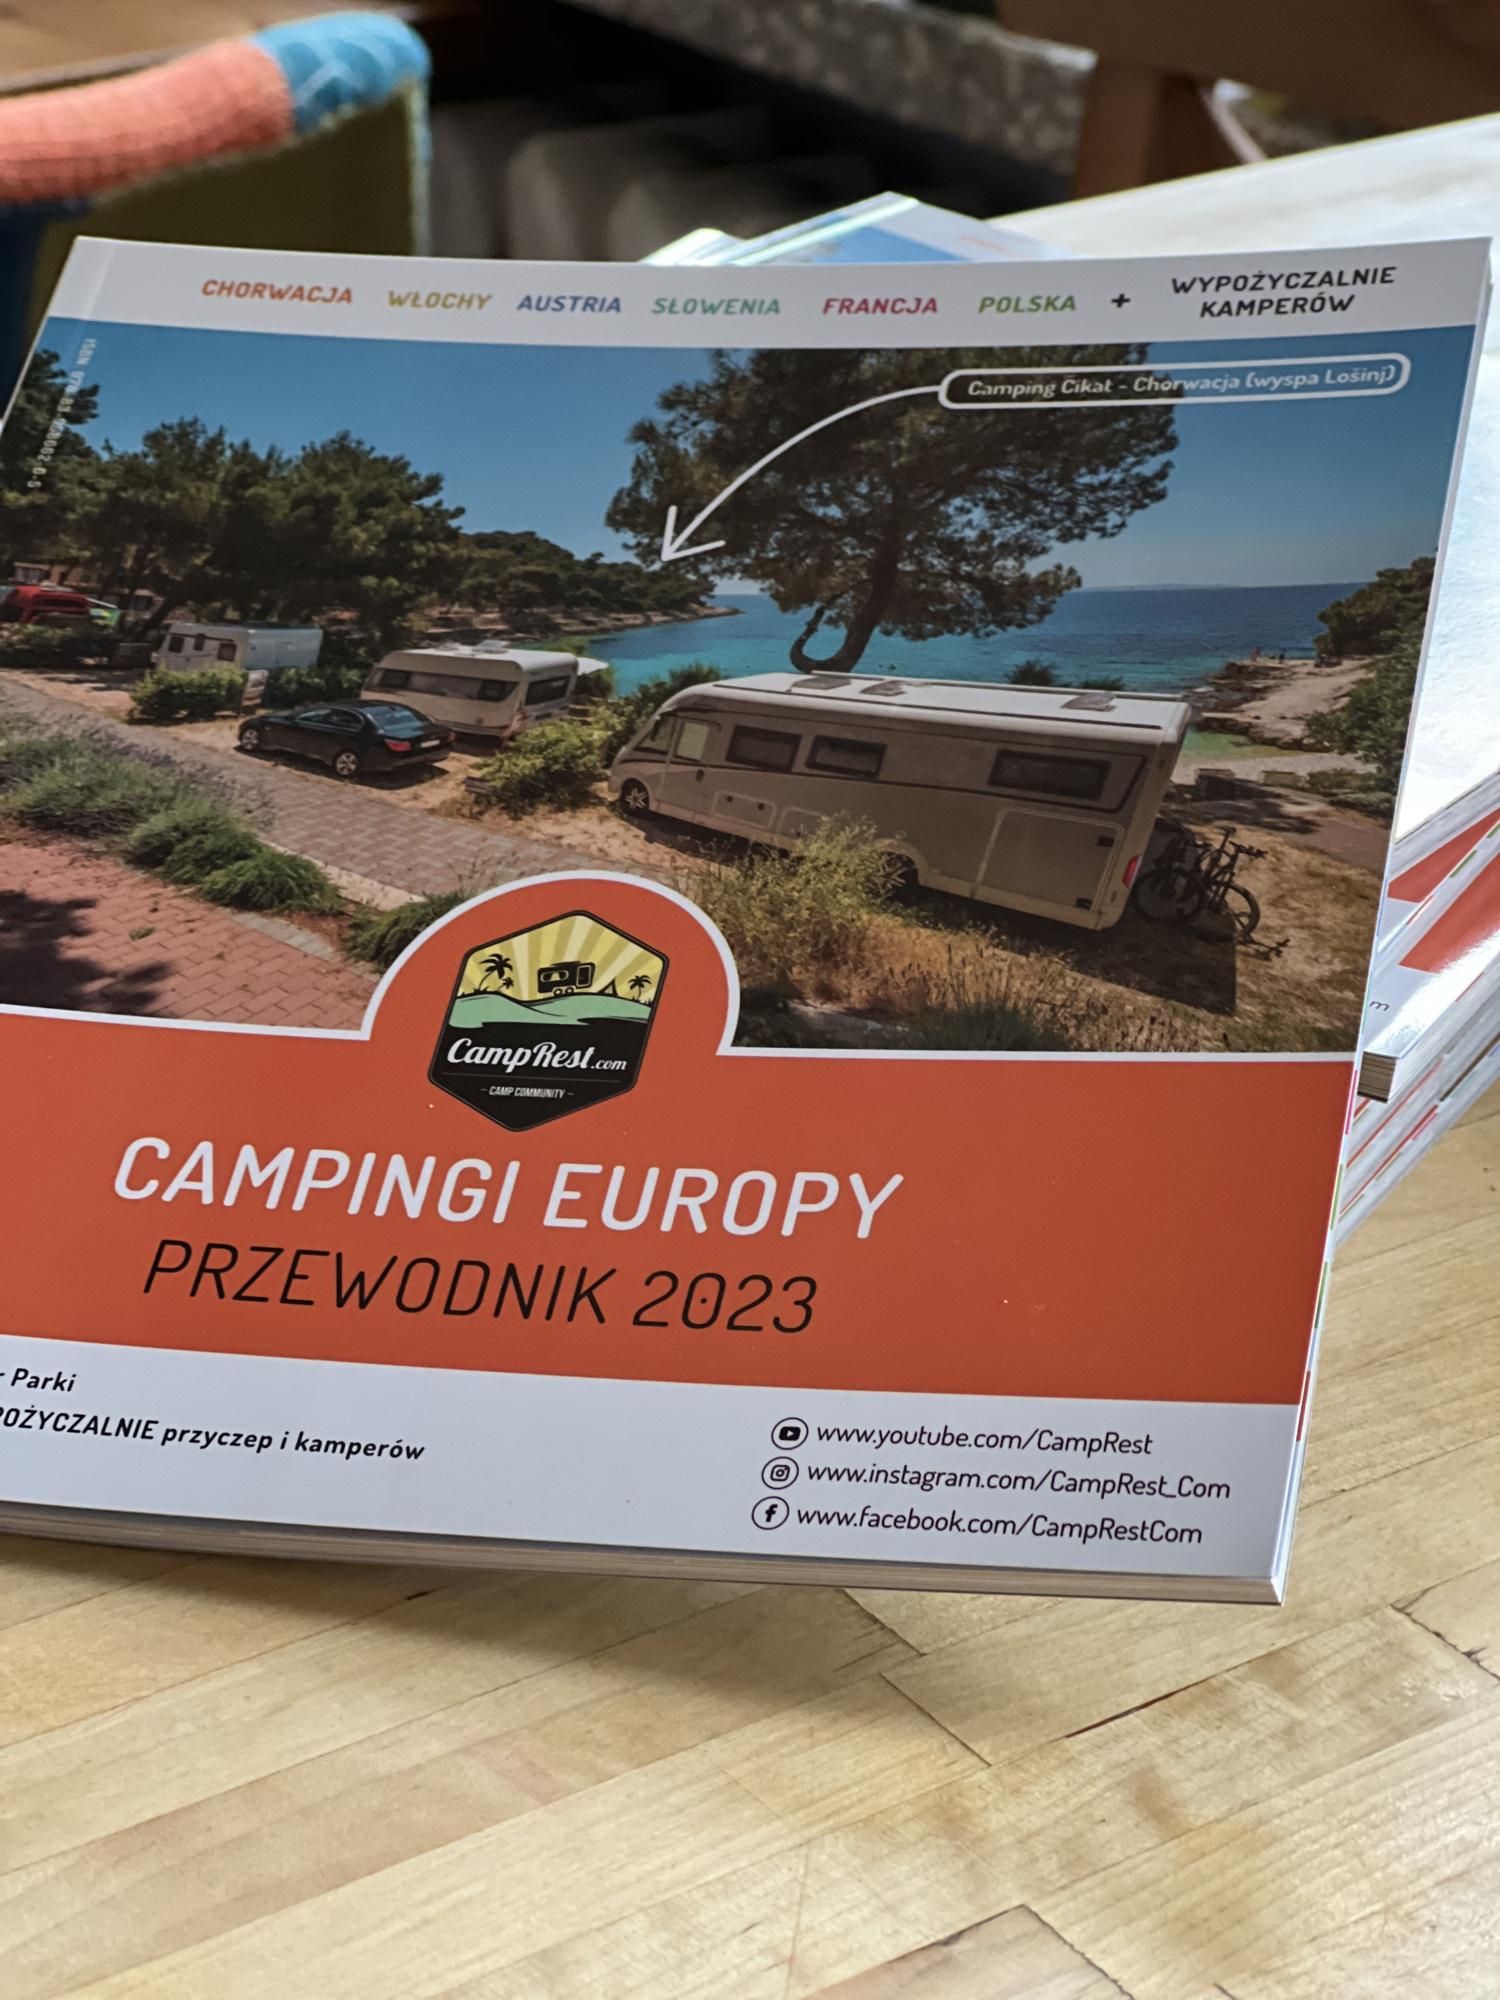 Camping Europe Guide 2023 - how to get it? – image 2